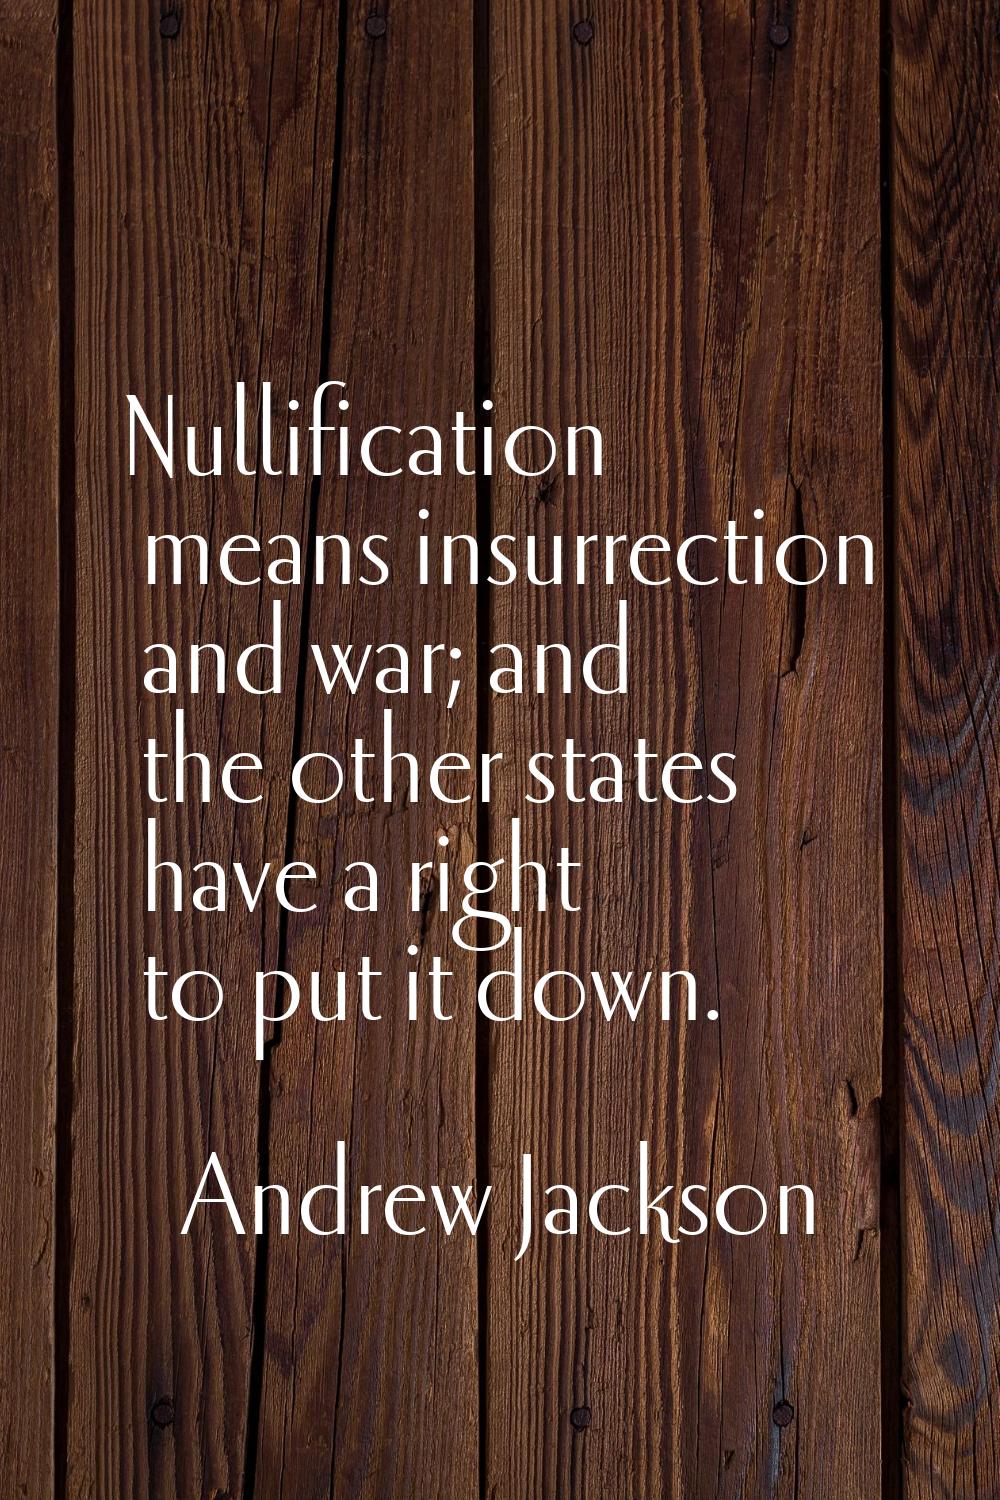 Nullification means insurrection and war; and the other states have a right to put it down.